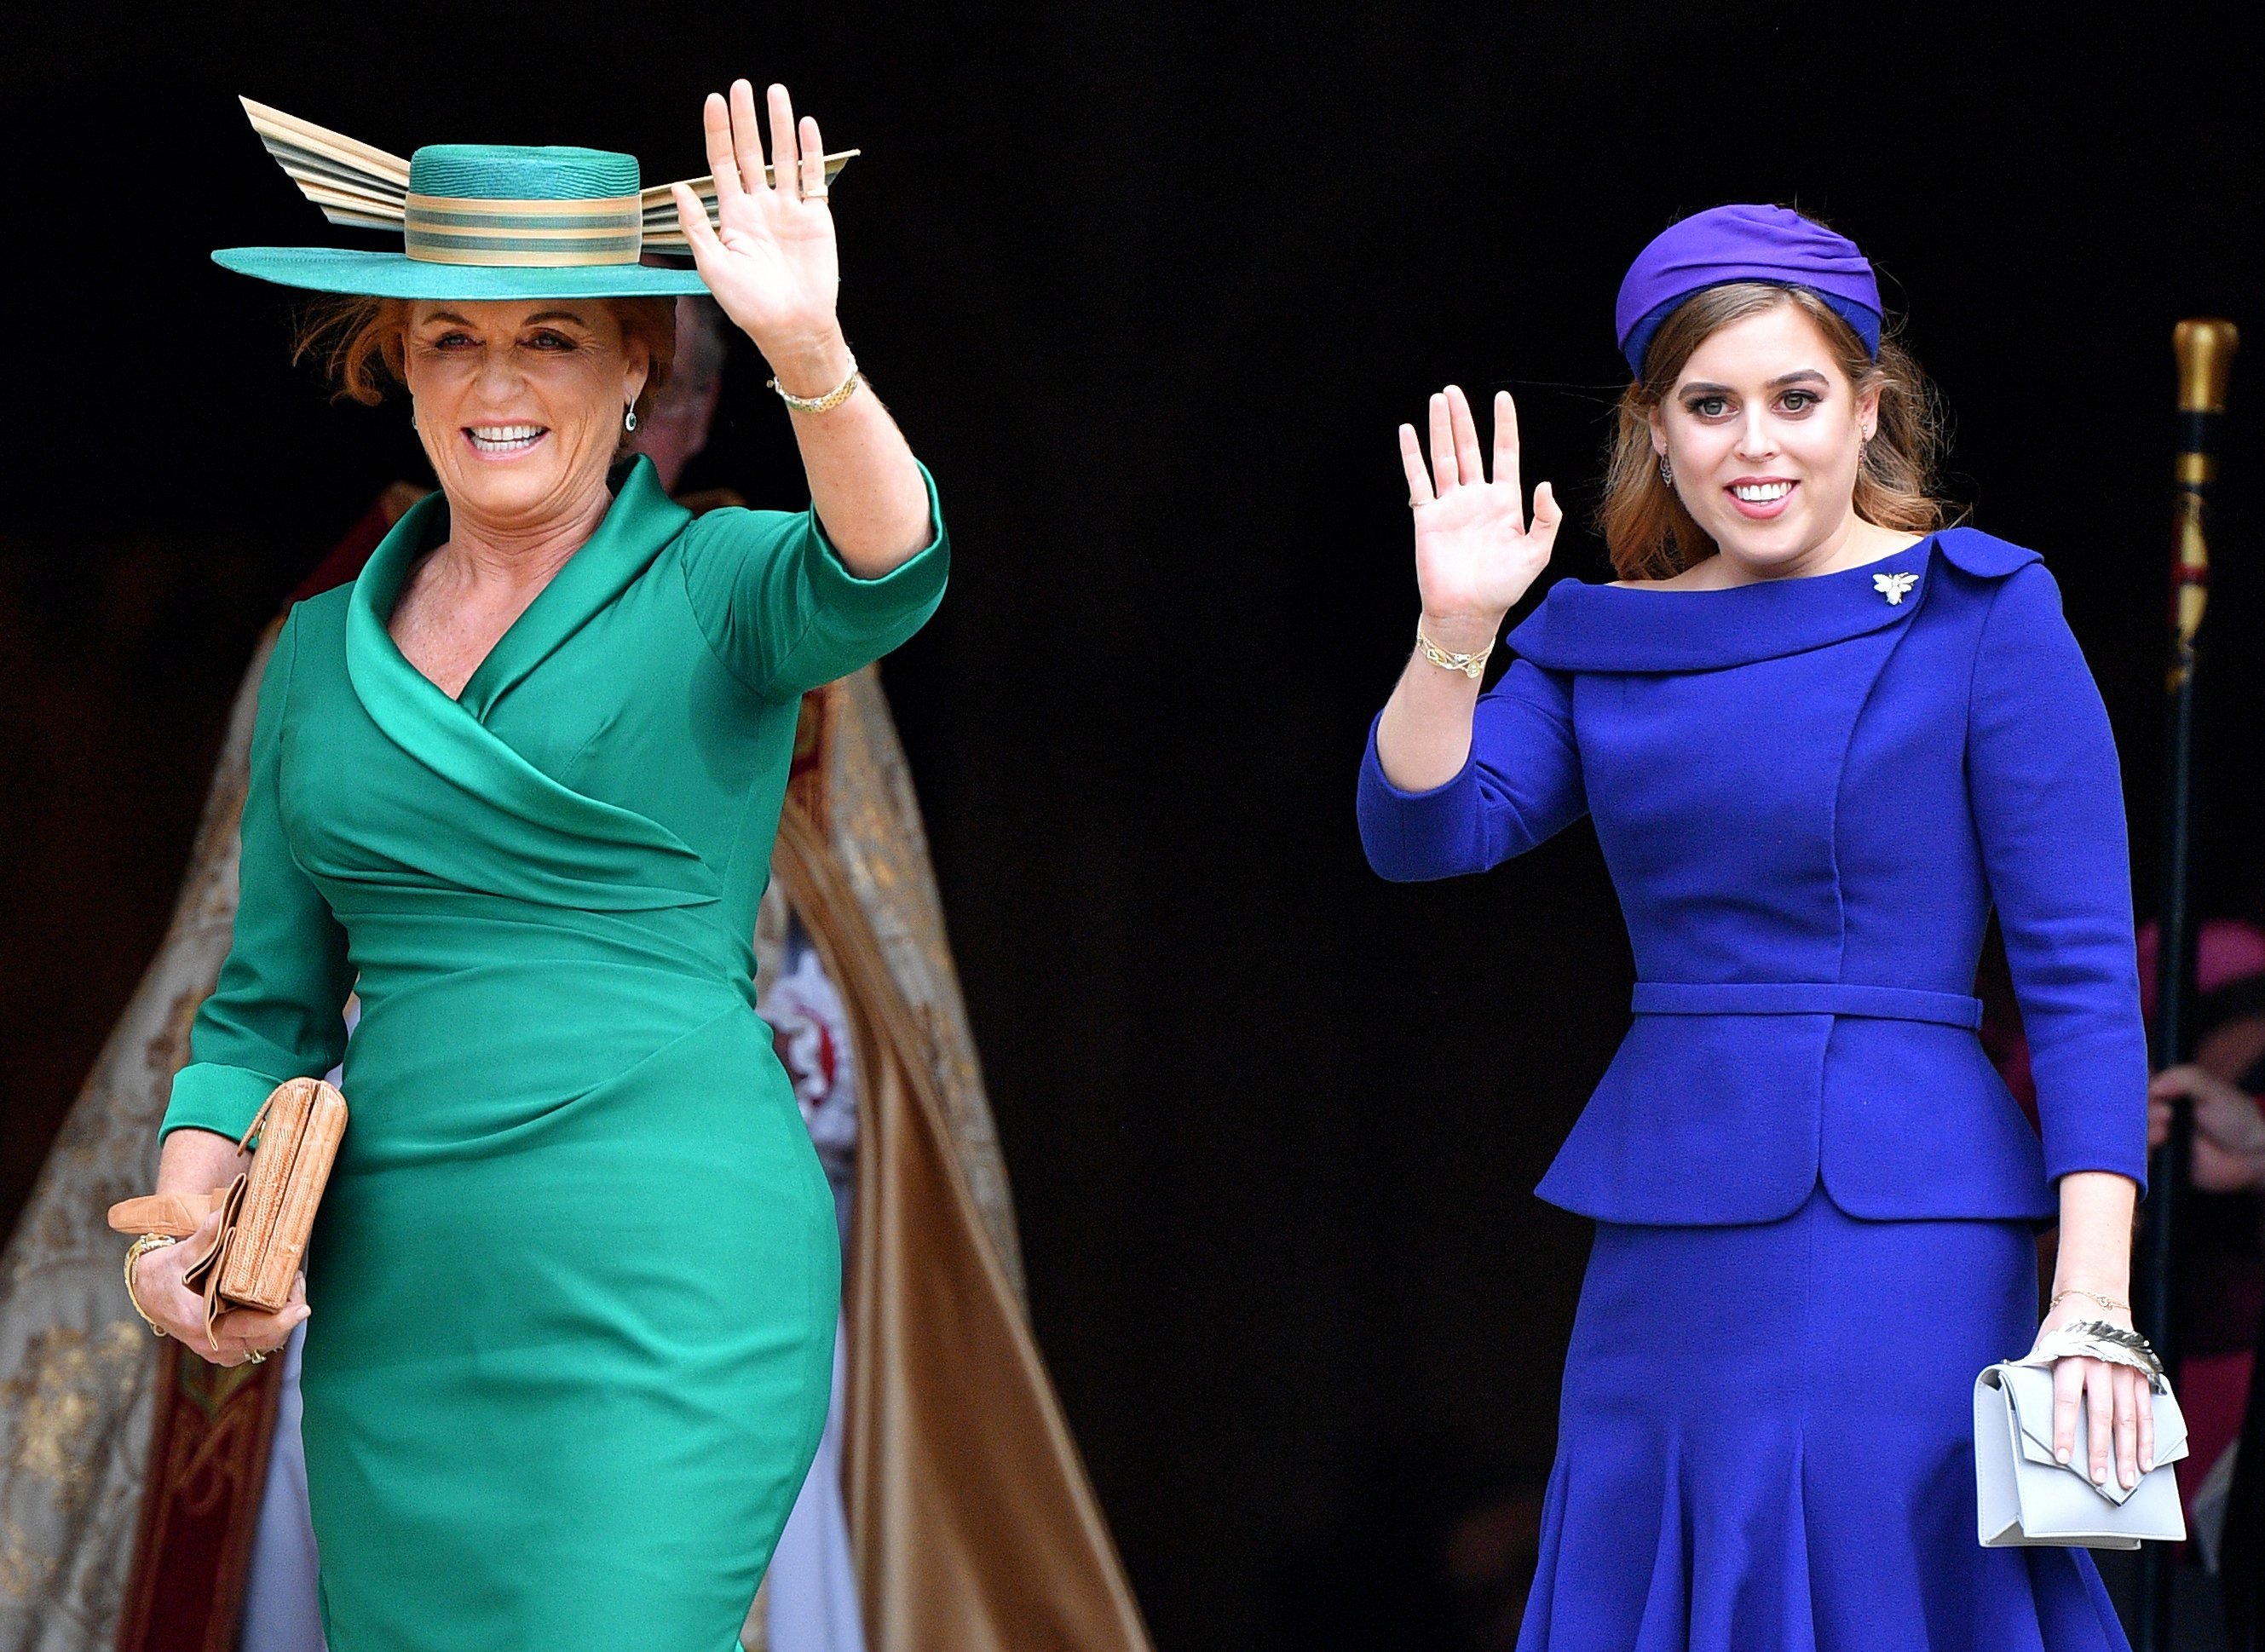 Sarah Ferguson and Princess Beatrice attend Princess Eugenie's wedding at St. George's Chapel in Windsor Castle in October 2018 | Photo: Getty Images